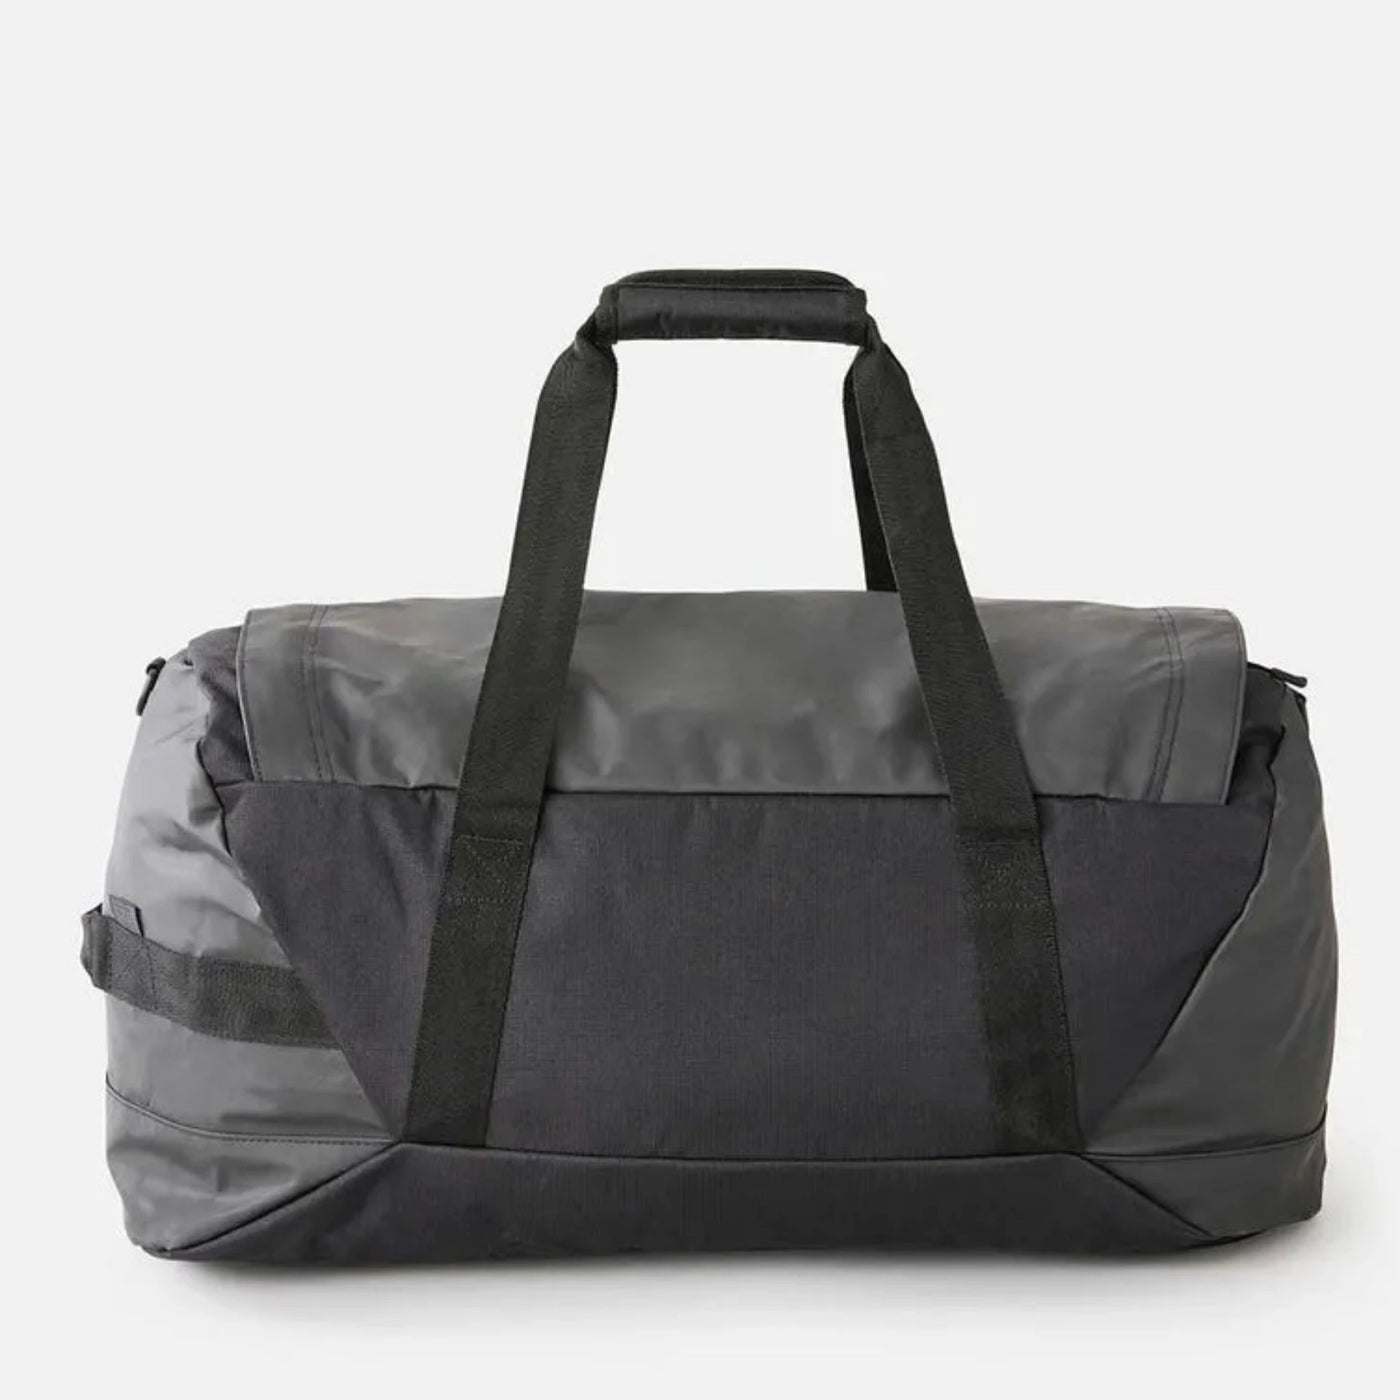 Rip Curl Packable Duffle 50L - Midnight